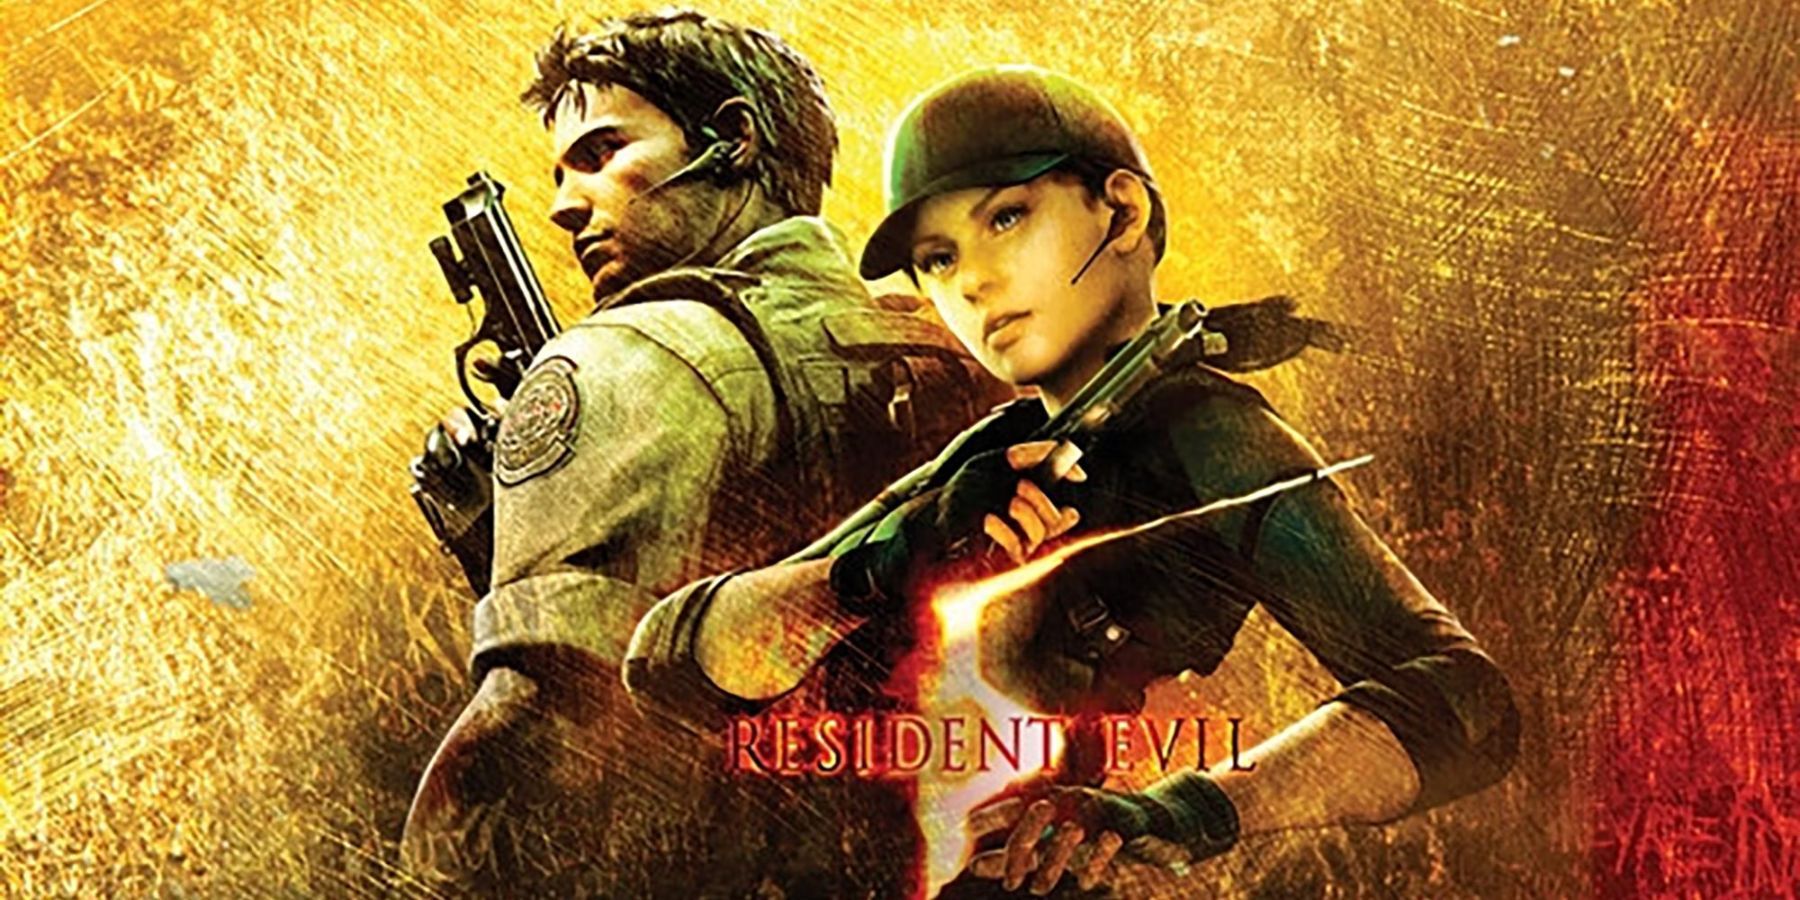 Resident Evil 5 Remake Has a Huge Task Ahead of Itself